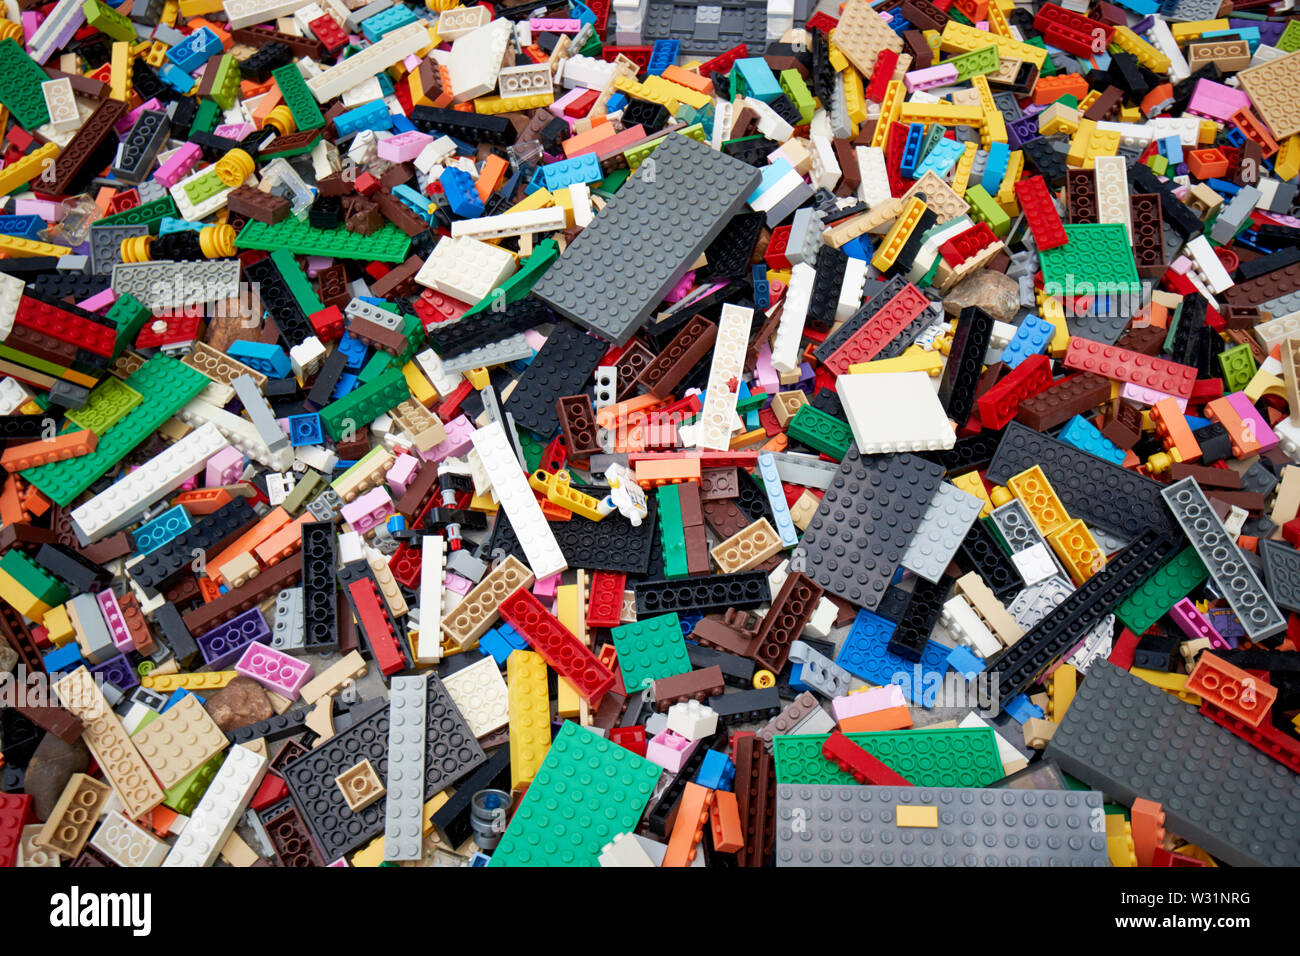 large collection of lego bricks and pieces Stock Photo